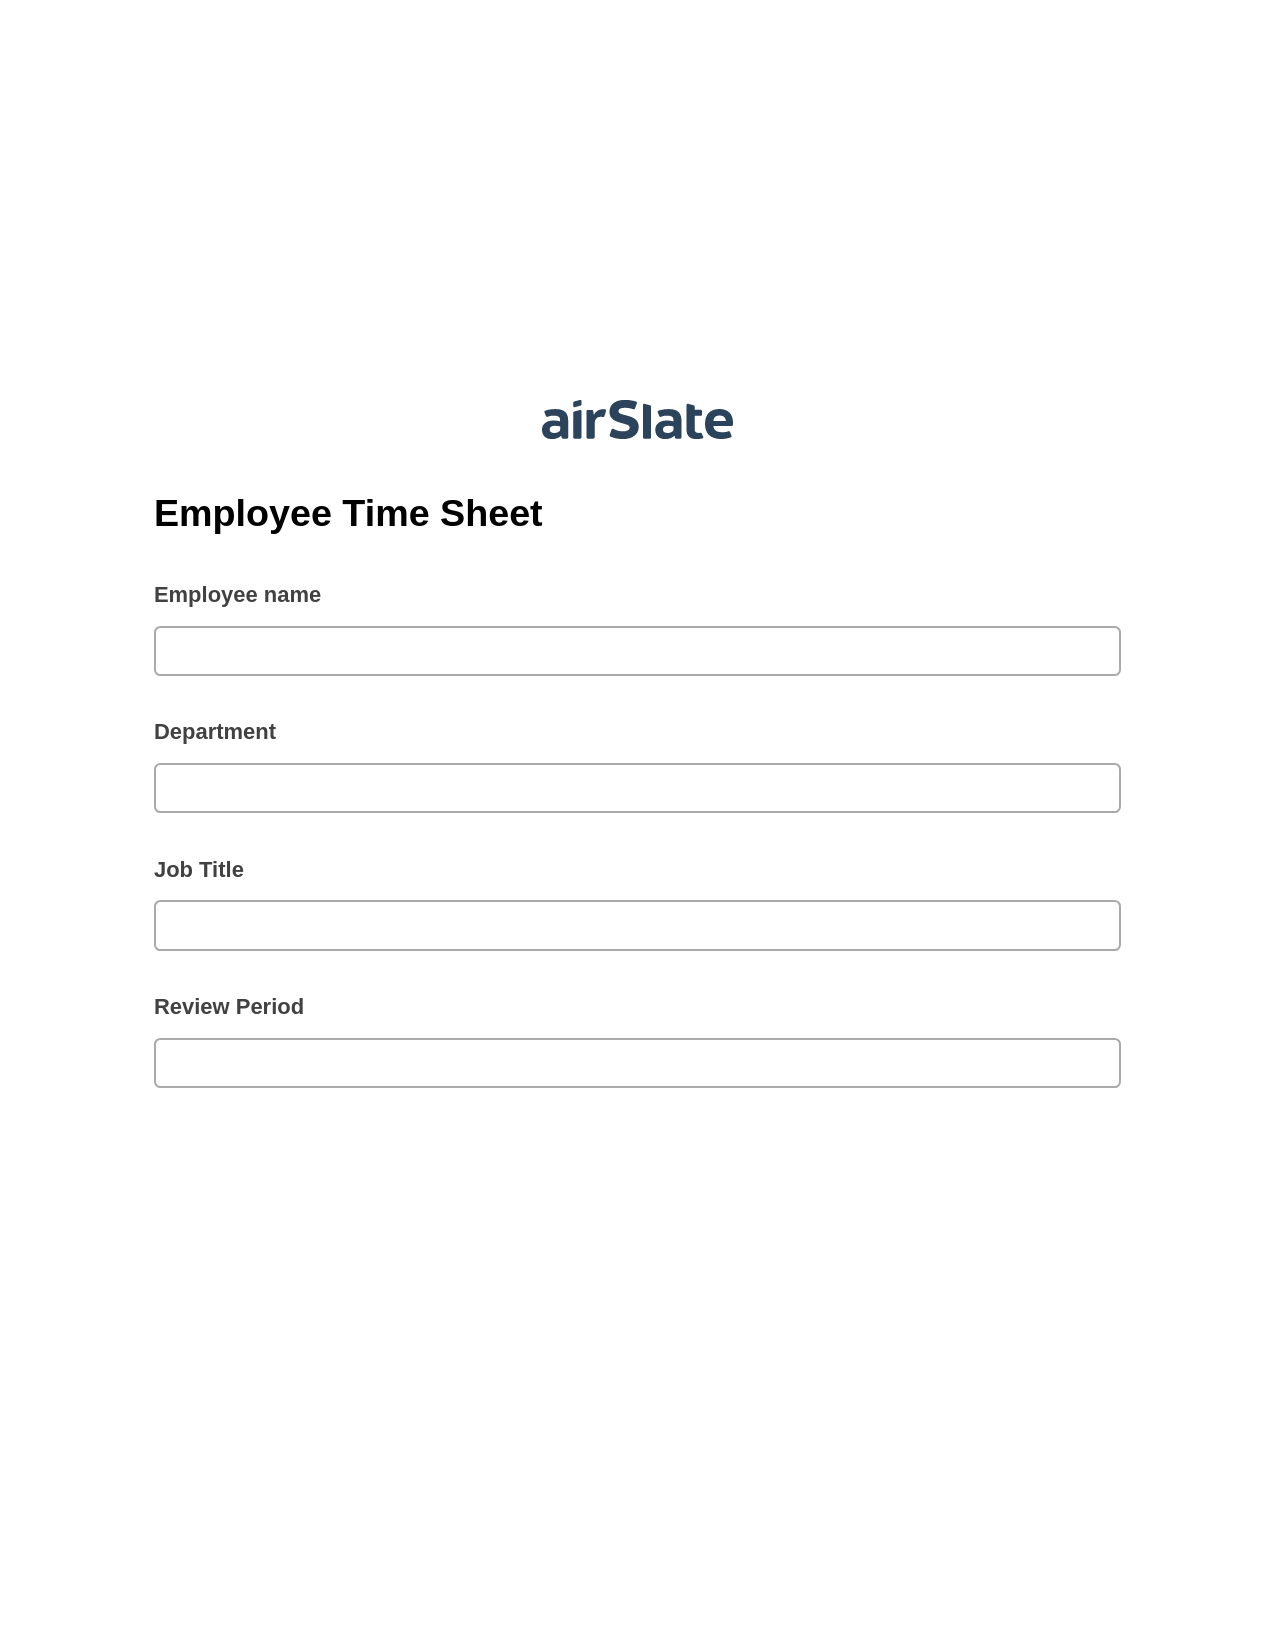 Employee Time Sheet Pre-fill Dropdowns from Excel Bot, Update Audit Trail Bot, Archive to OneDrive Bot